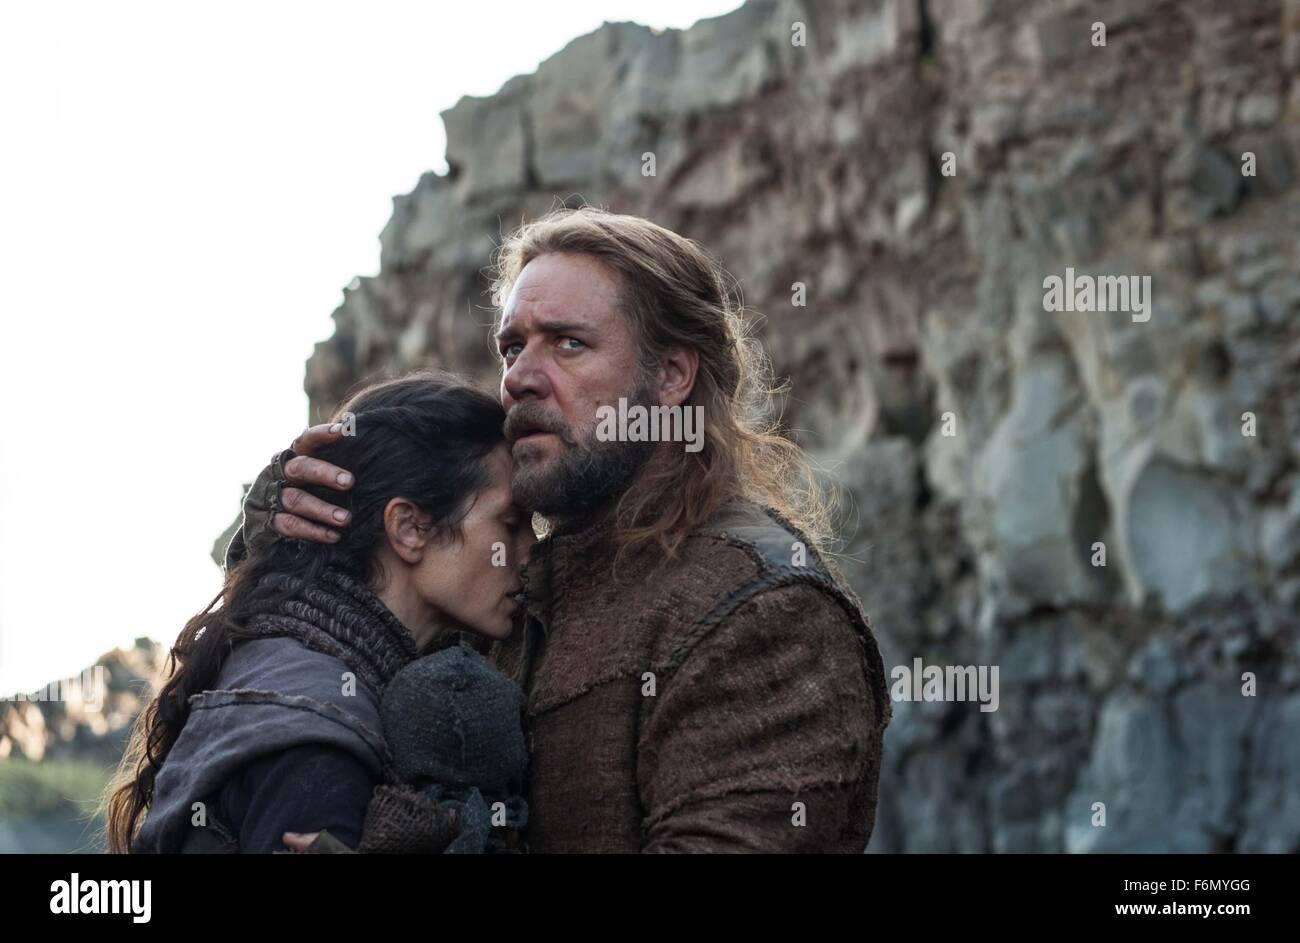 RELEASE DATE: March 28, 2014 TITLE: Noah STUDIO: Paramount Pictures DIRECTOR: Darren Aronofsky PLOT: The Biblical Noah suffers visions of an apocalyptic deluge and takes measures to protect his family from the coming flood PICTURED: RUSSELL CROWE as Noah and JENNIFER CONNELLY as Naameh (Credit: c Paramount/Entertainment Pictures) Stock Photo